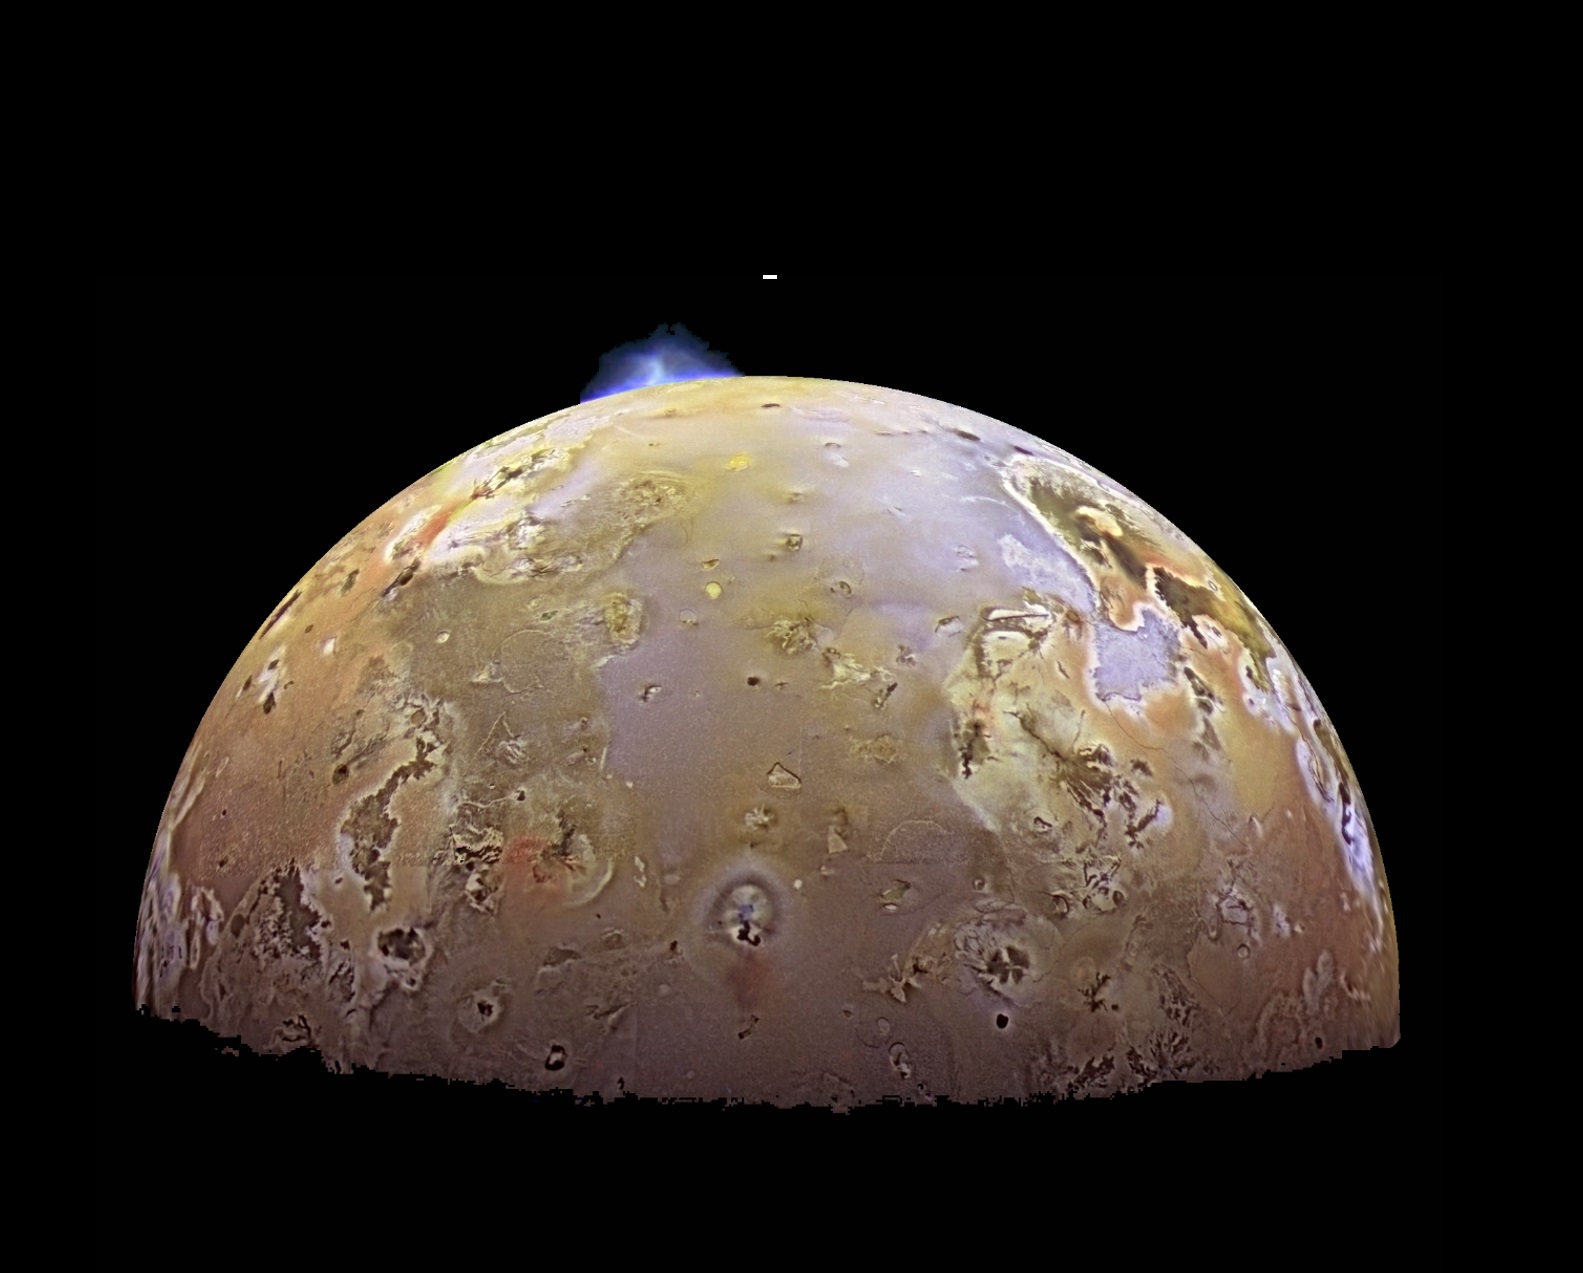 The Jovian moon Io, showing a volcanic eruption.